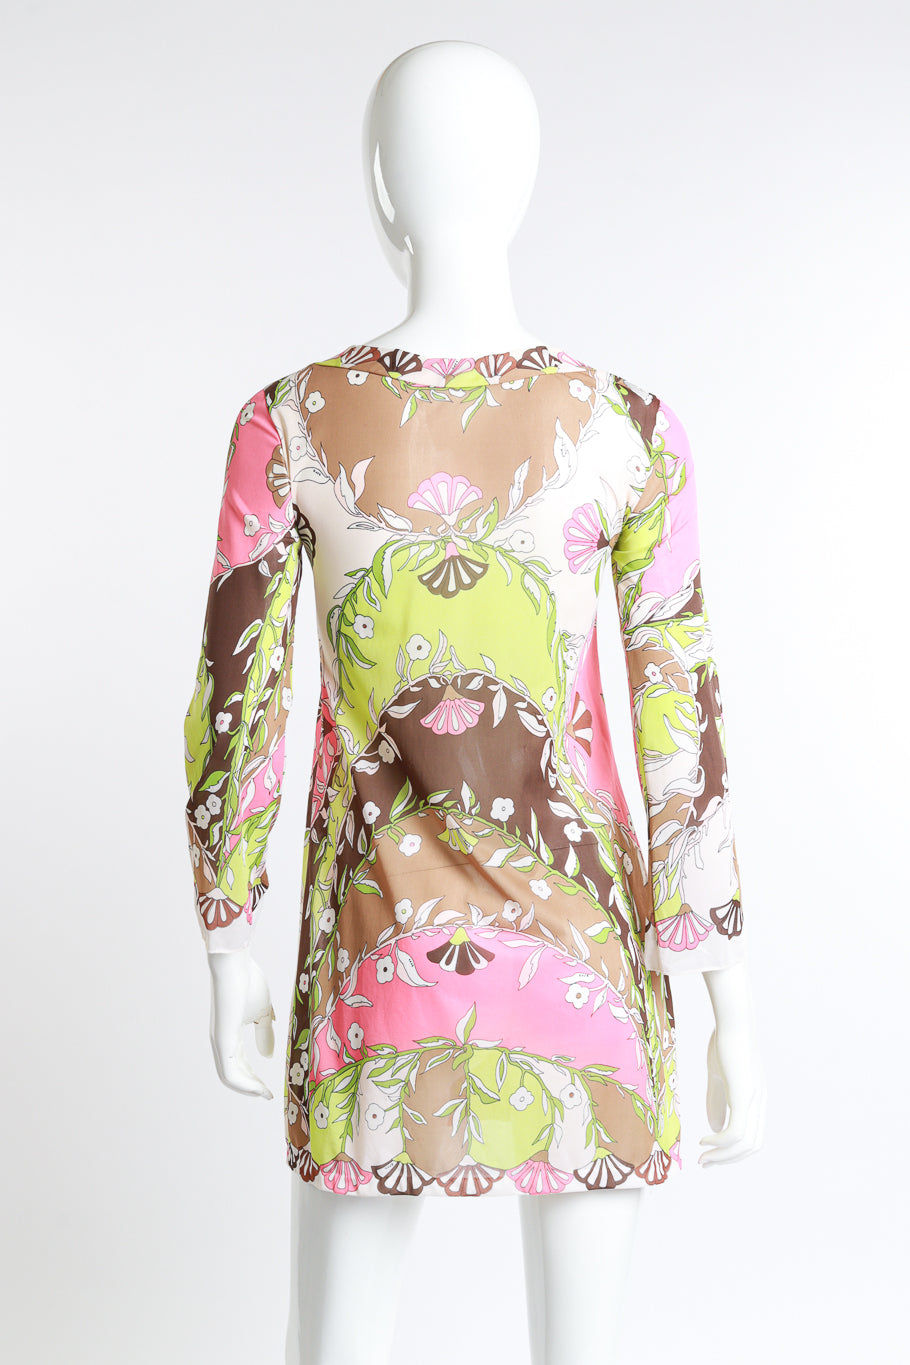 Vintage Emilio Pucci for Formfit Rogers floral fan lime and pink mesh jacket mini dress back view as worn on the mannequin @ Recess LA